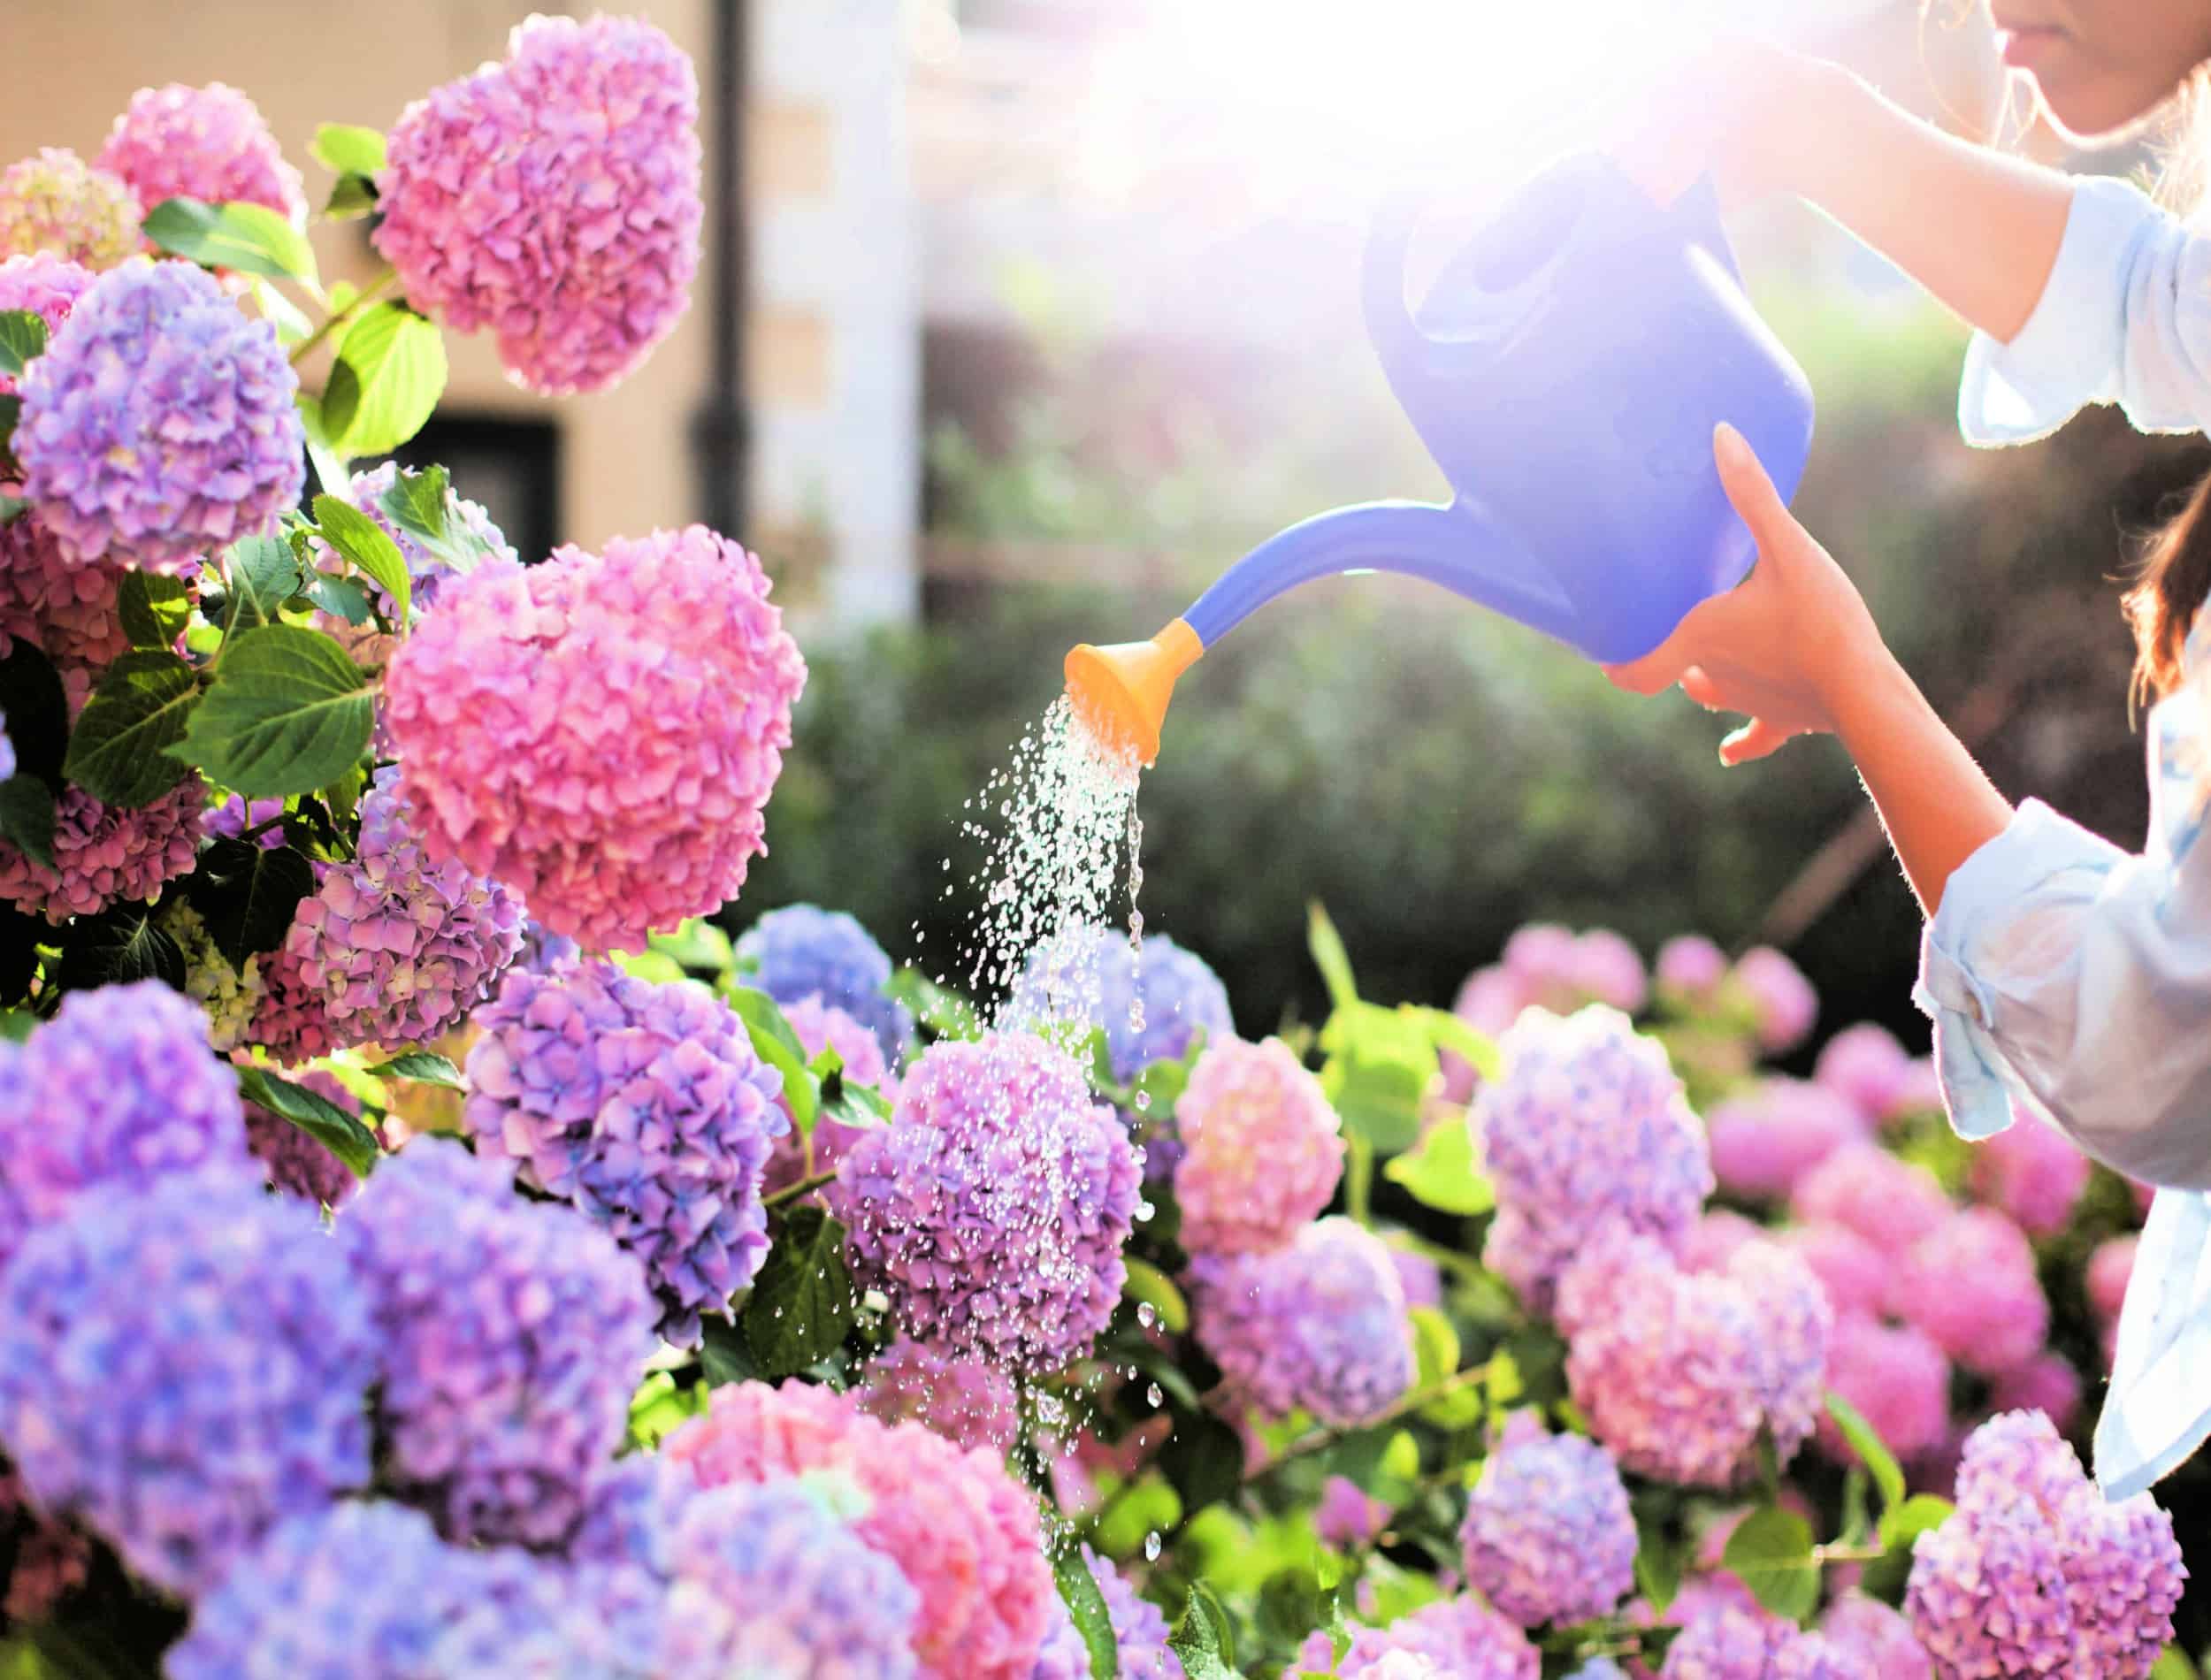 Gardening in bushes of hydrangea. Gardener waters flowers with watering can. Girl takes care the garden. Flowers are pink, blue and blooming in street by house.